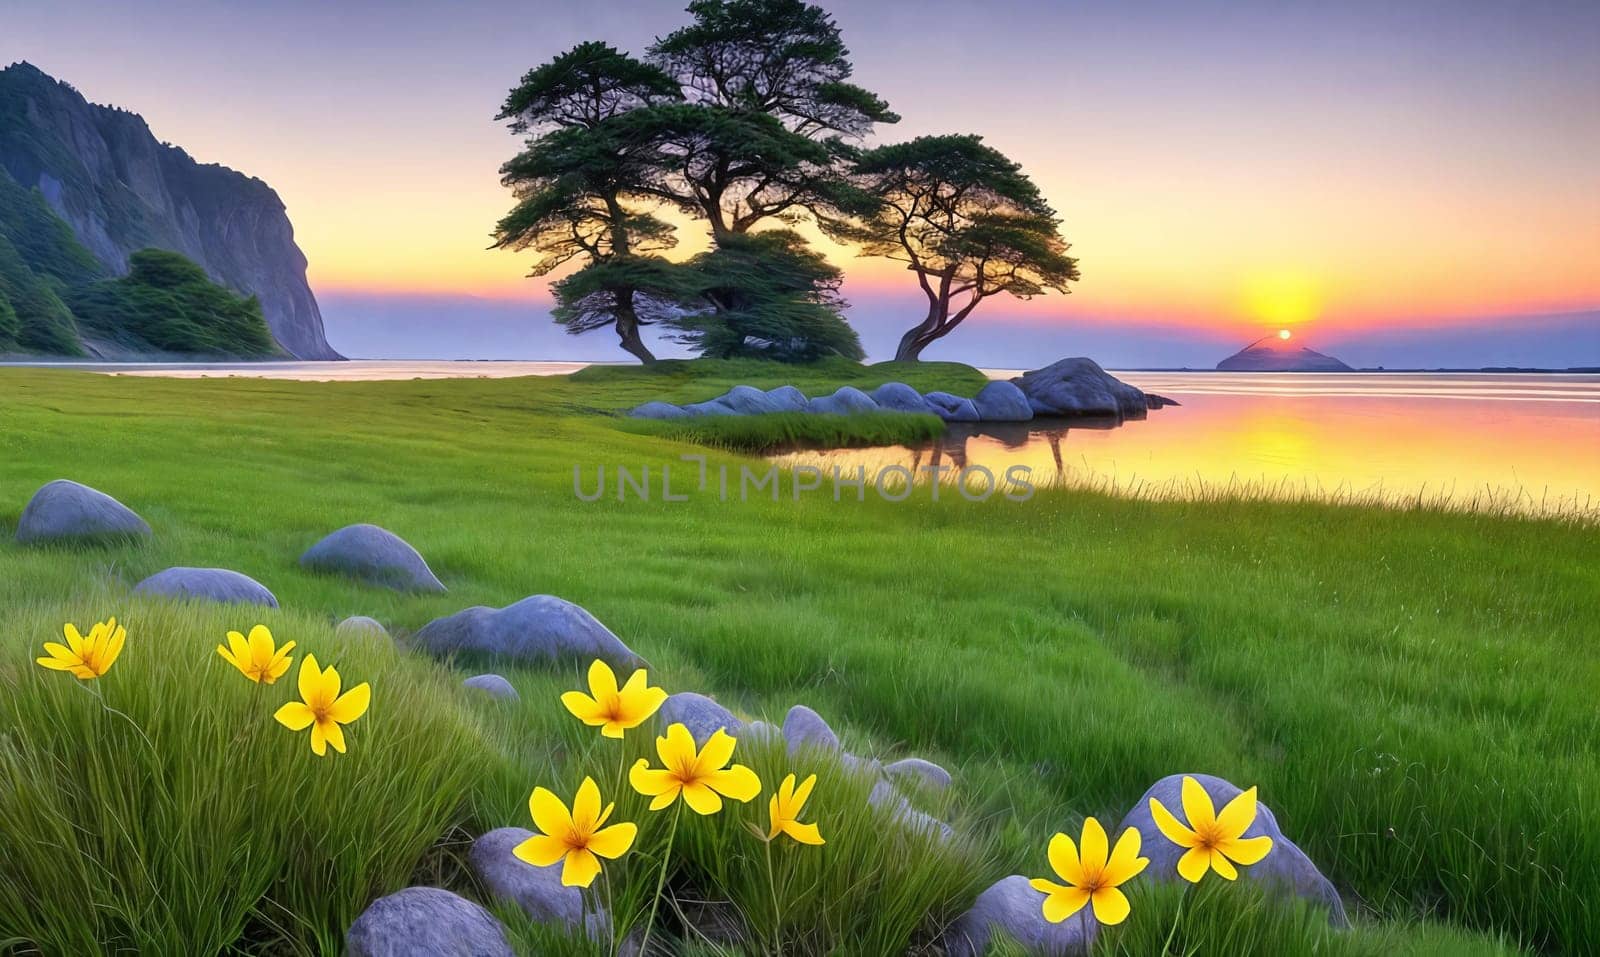 Inspirational Nature. A serene landscape photograph of a peaceful meadow at sunrise with a single flower resting on a rock or in the grass to convey a sense of tranquility and inner strength.